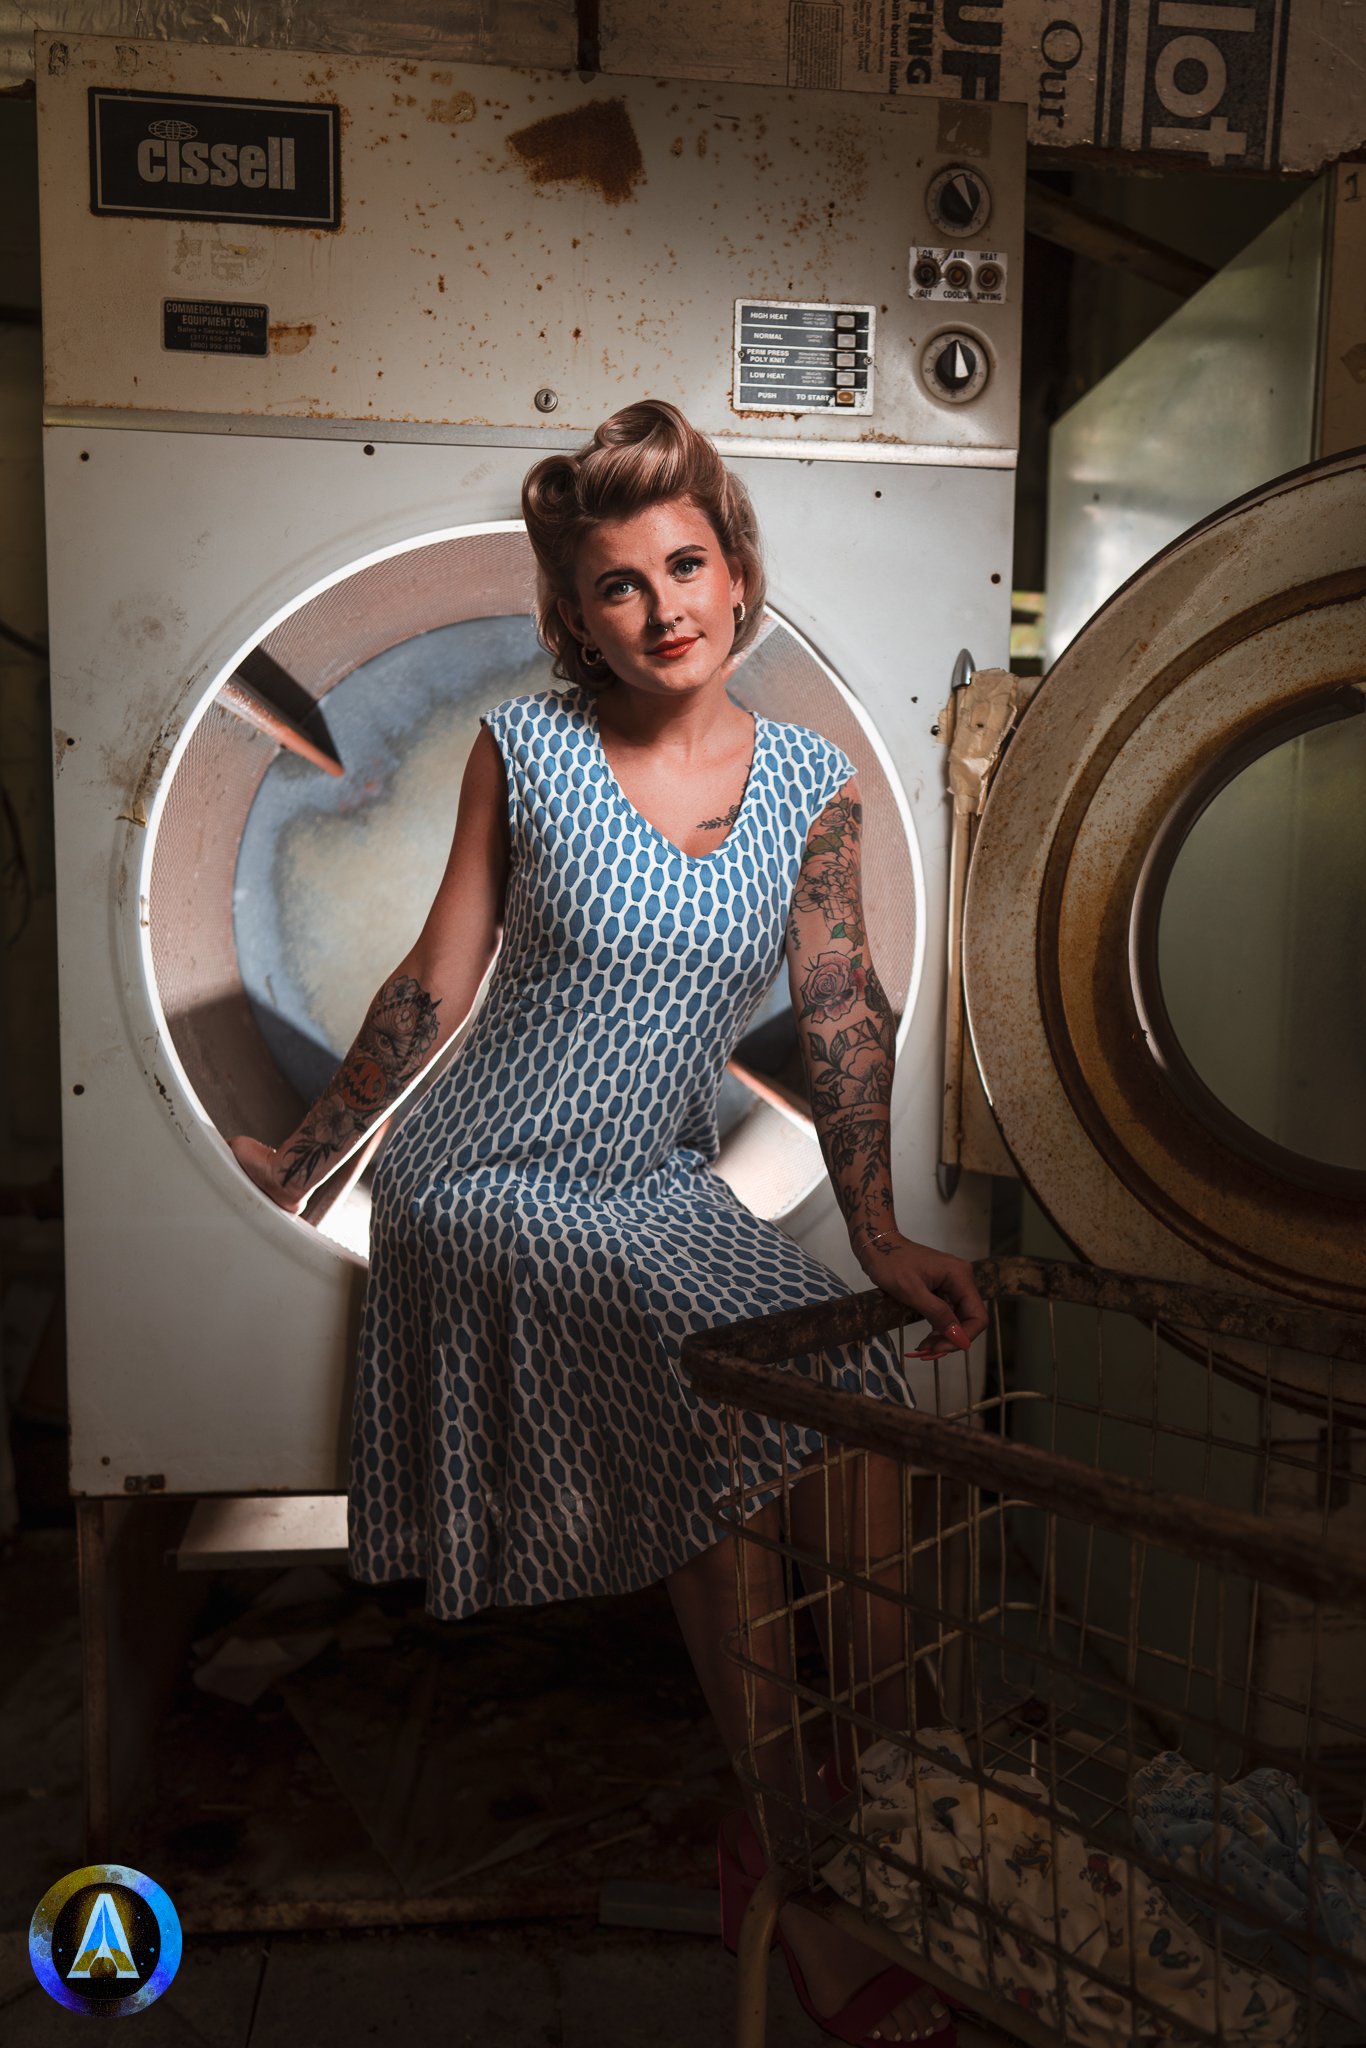 Blonde model courtney france poses in an abandoned shop / laundromat in pinup attire.